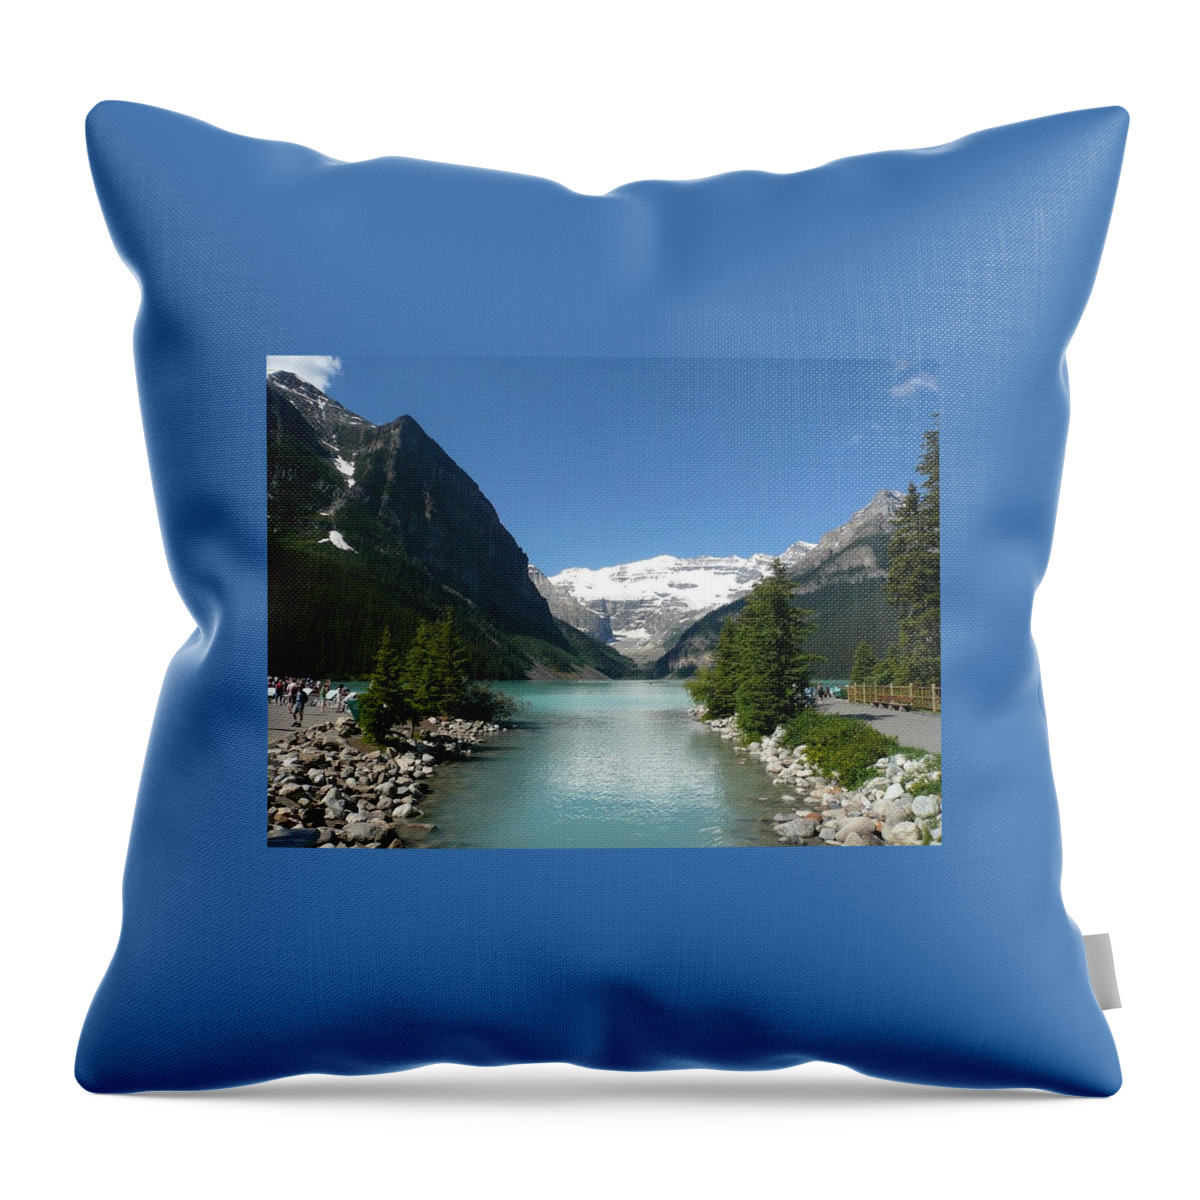 Lake Louise Throw Pillow featuring the photograph Lake Louise by Matthew Mairs